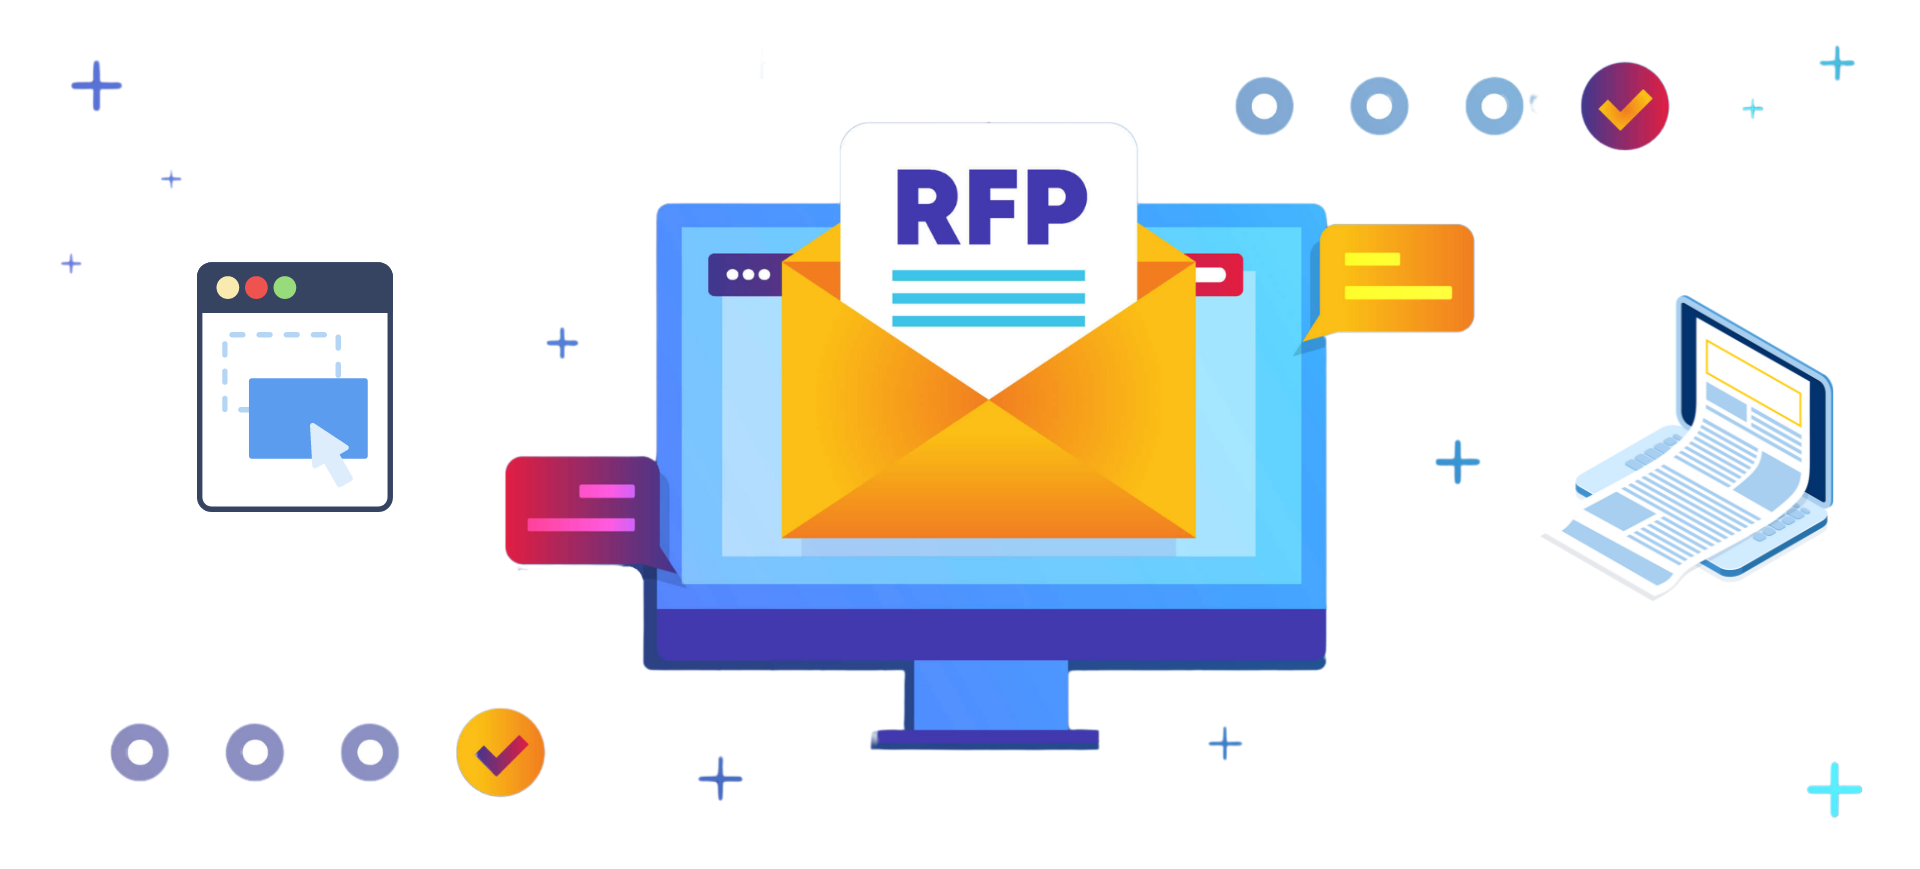 RFP template icons